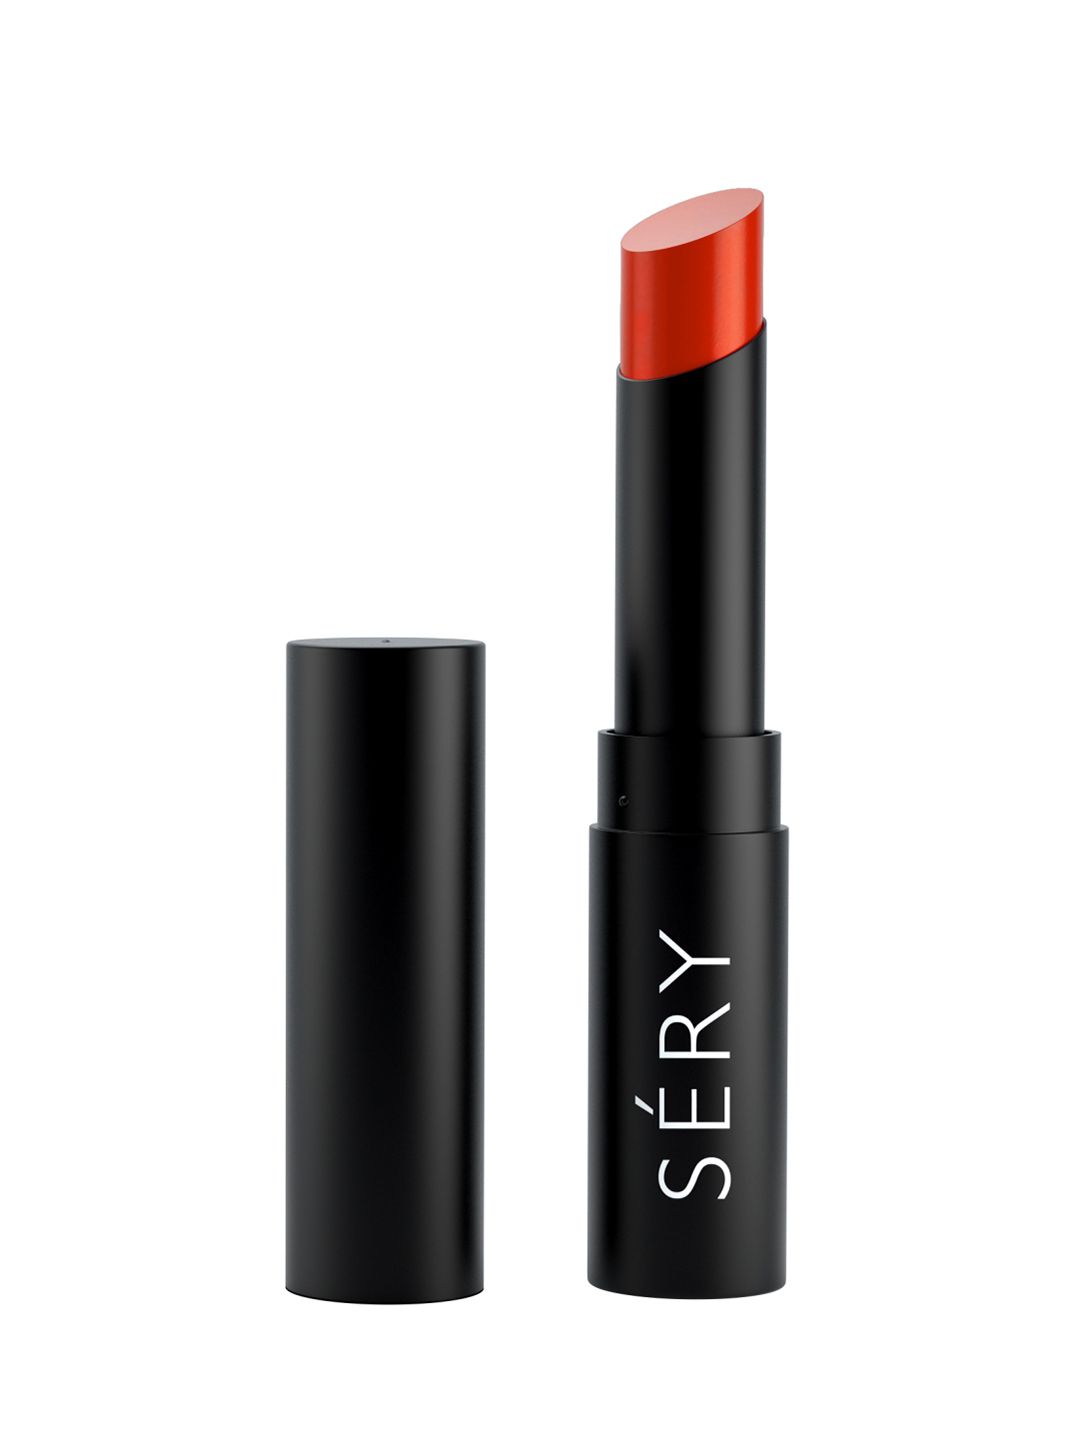 SERY Say Cheeez Creamy Matte Lip Color - Cute Coral CL01 Price in India